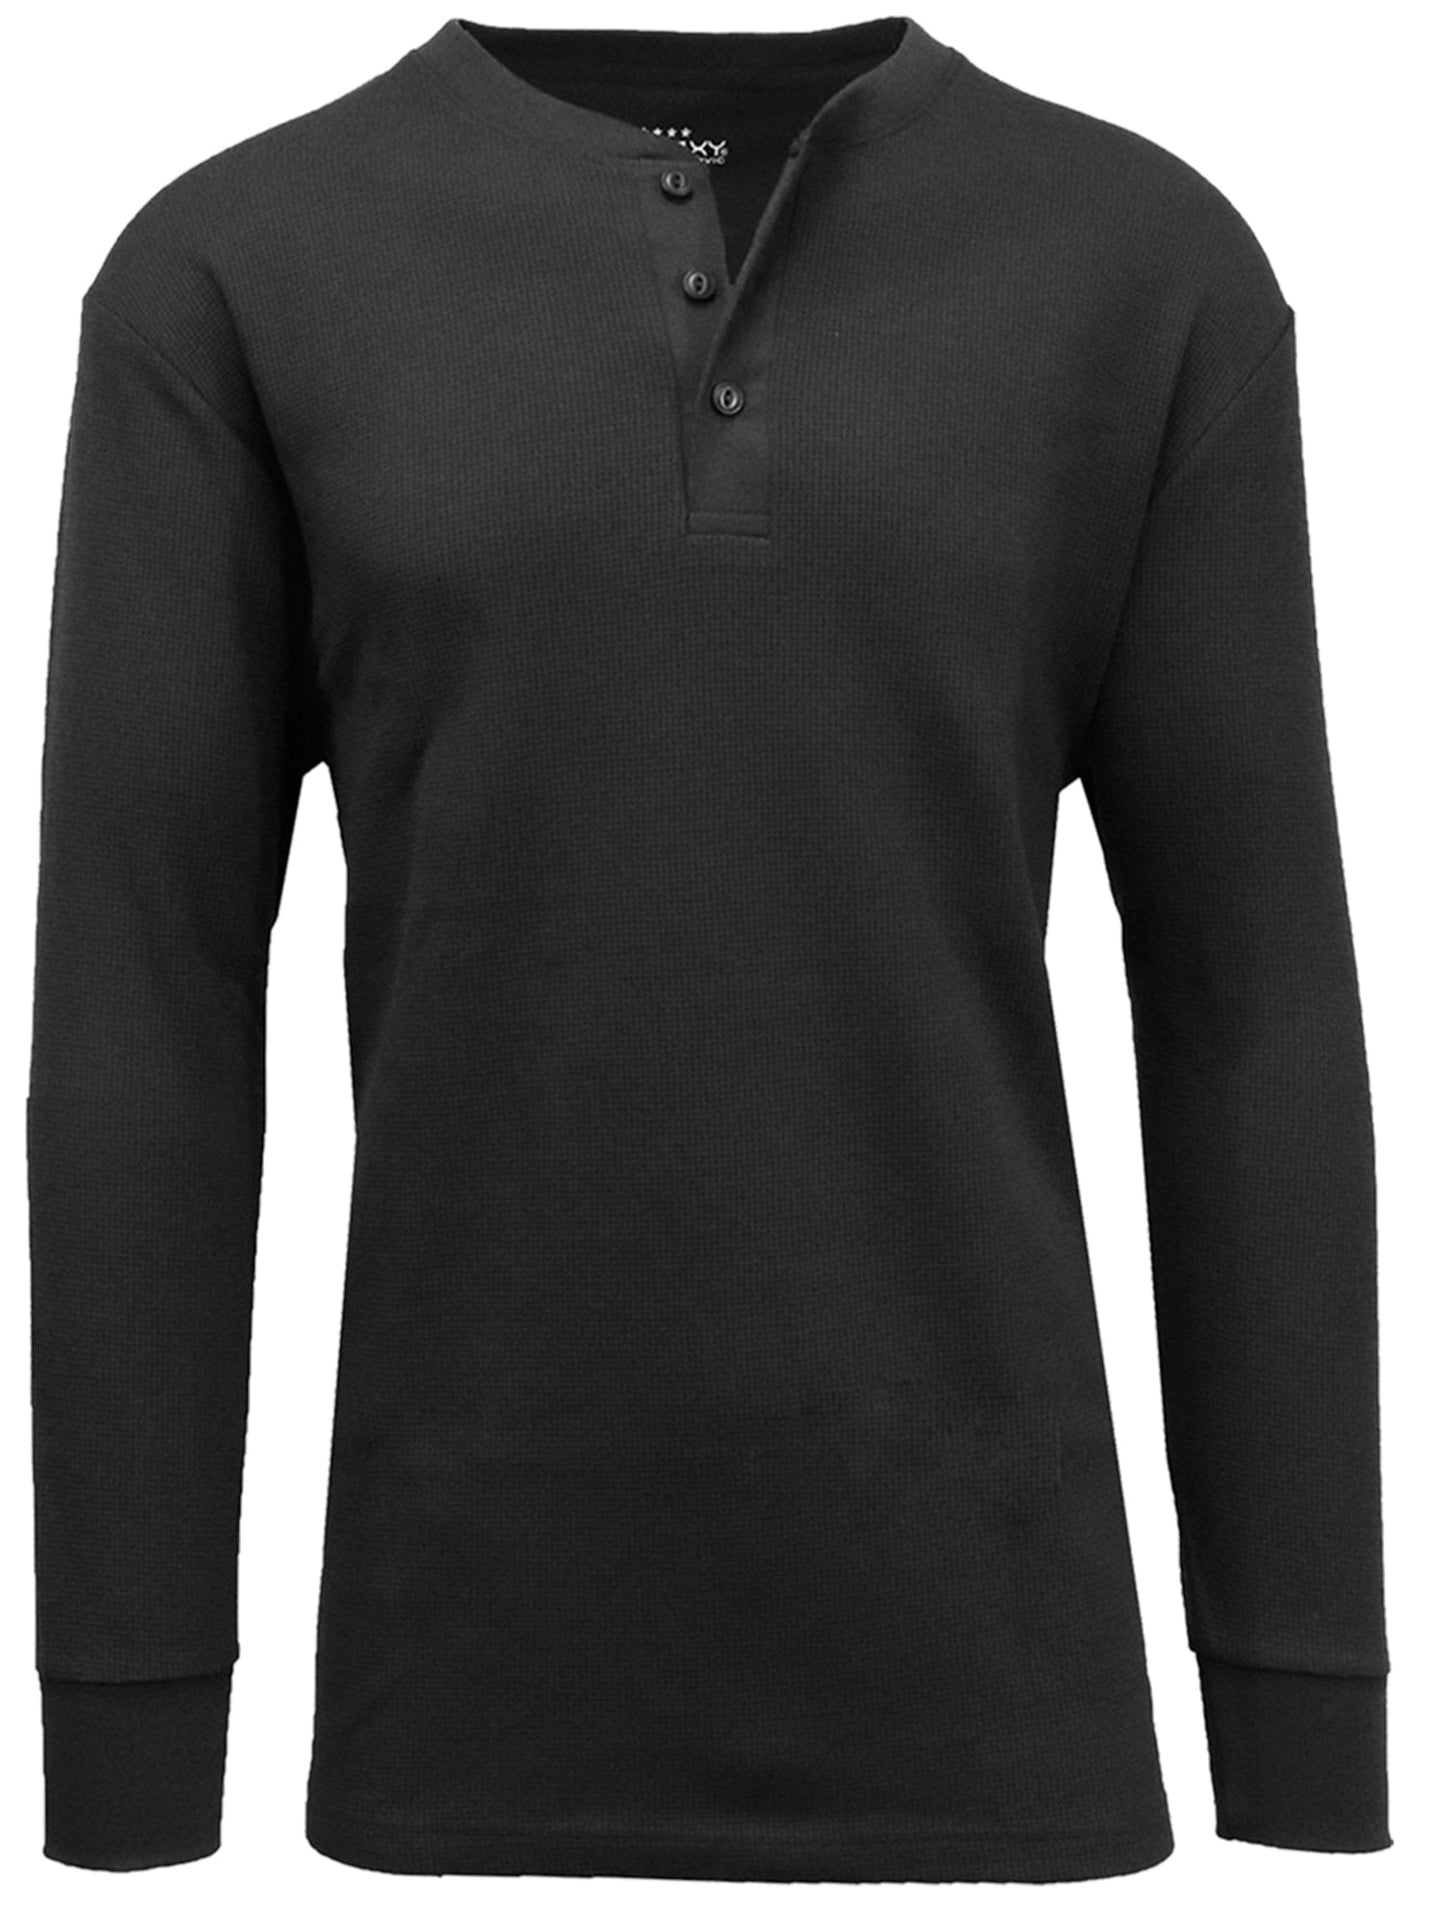 Men's Henley Thermal Long Sleeve - GalaxybyHarvic